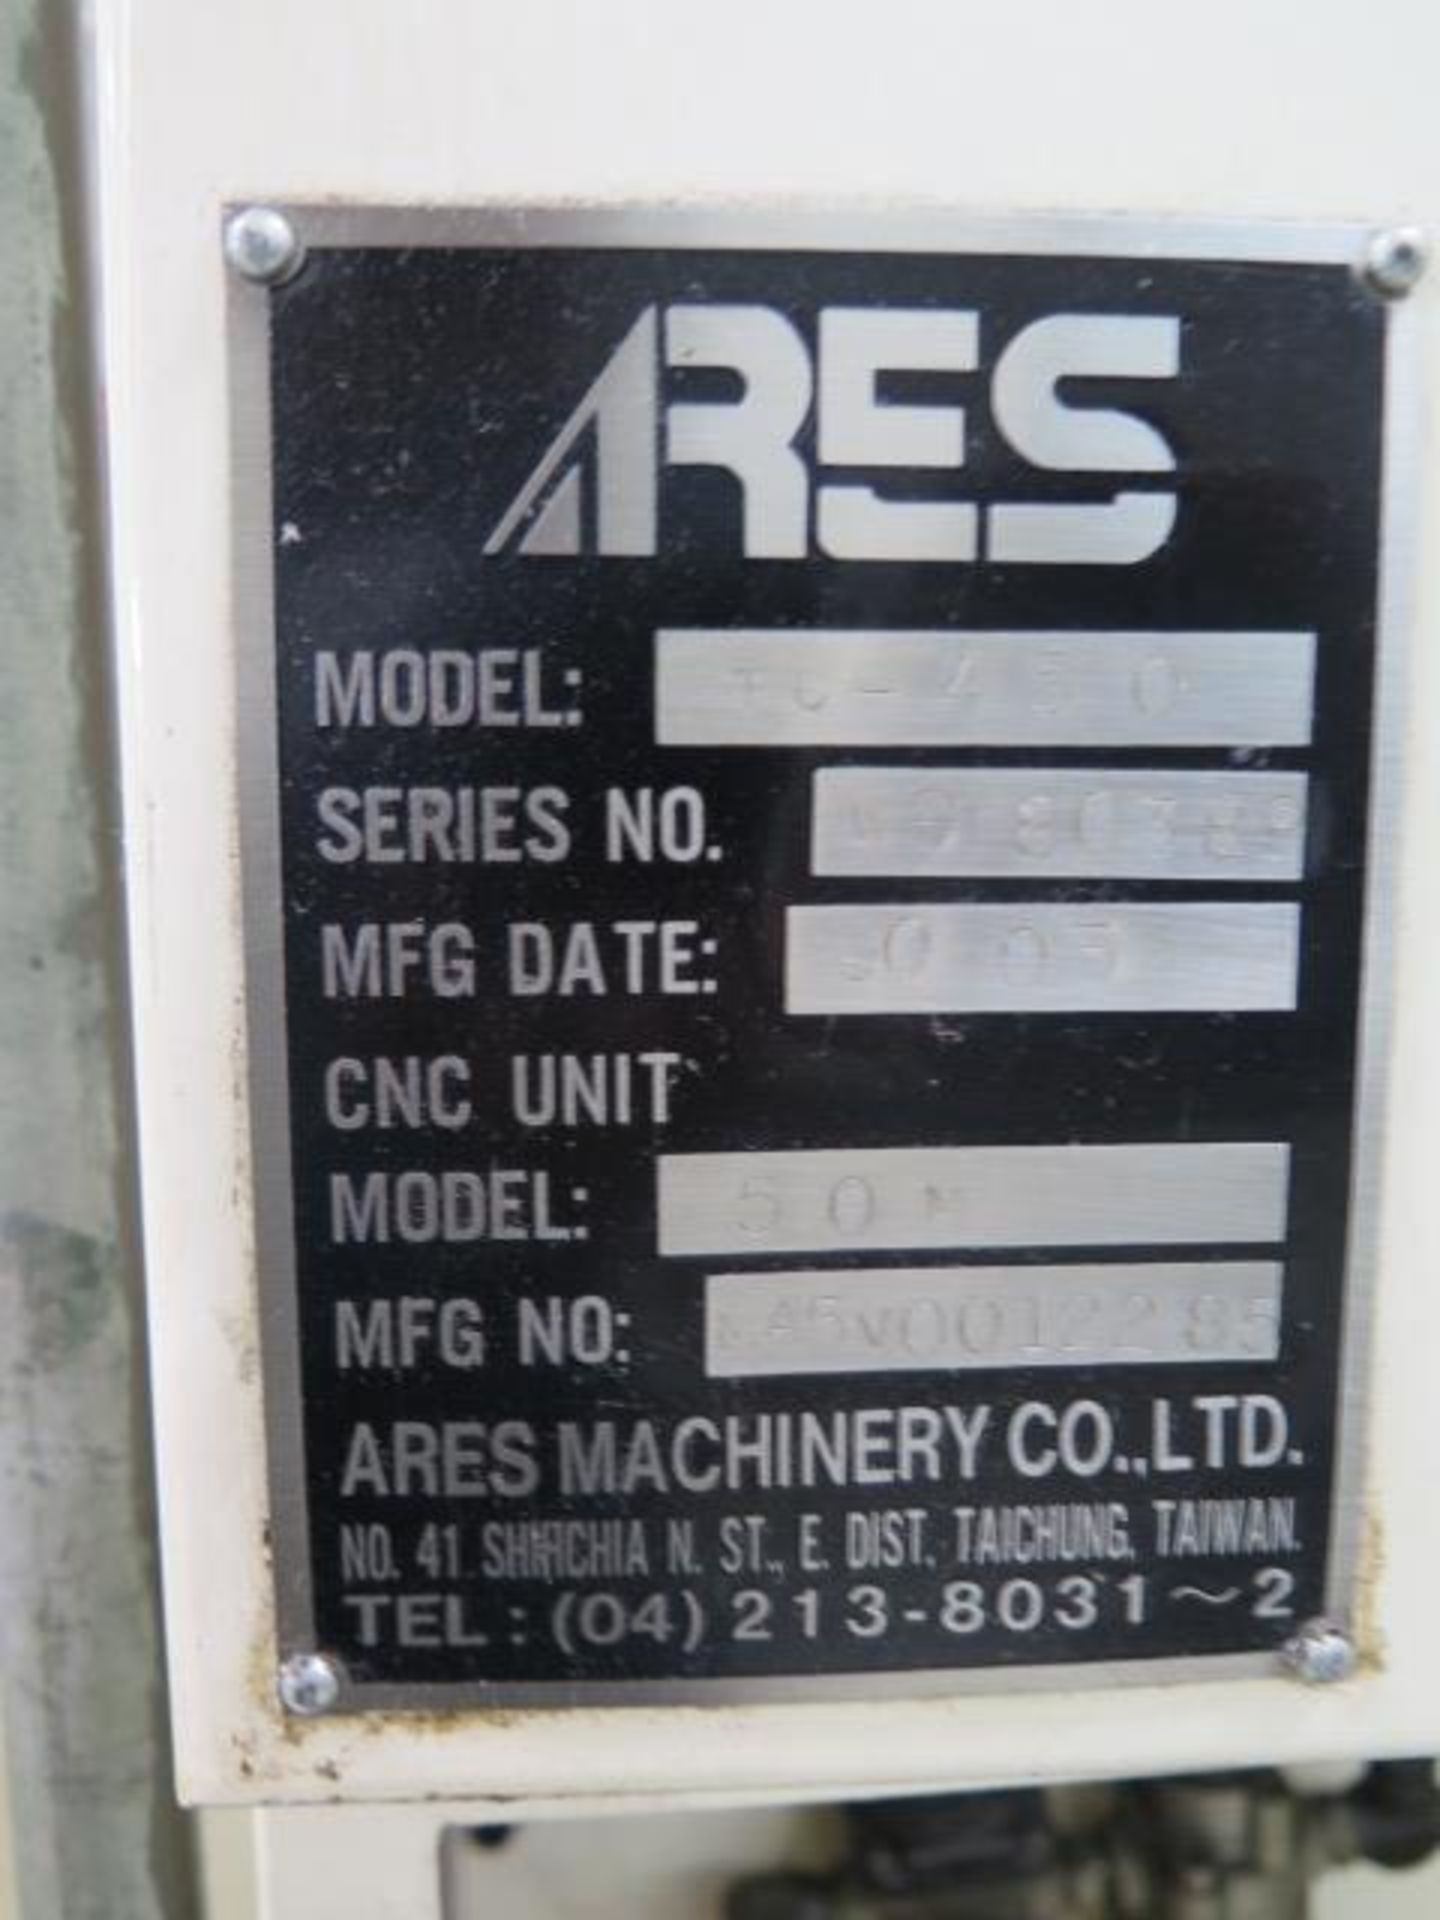 2003 Acra ADT-450 CNC Drilling /Tapping Center s/n MA5V0012285 (NEEDS REPAIR) w/ Mits 50M, OLD AS IS - Image 14 of 14